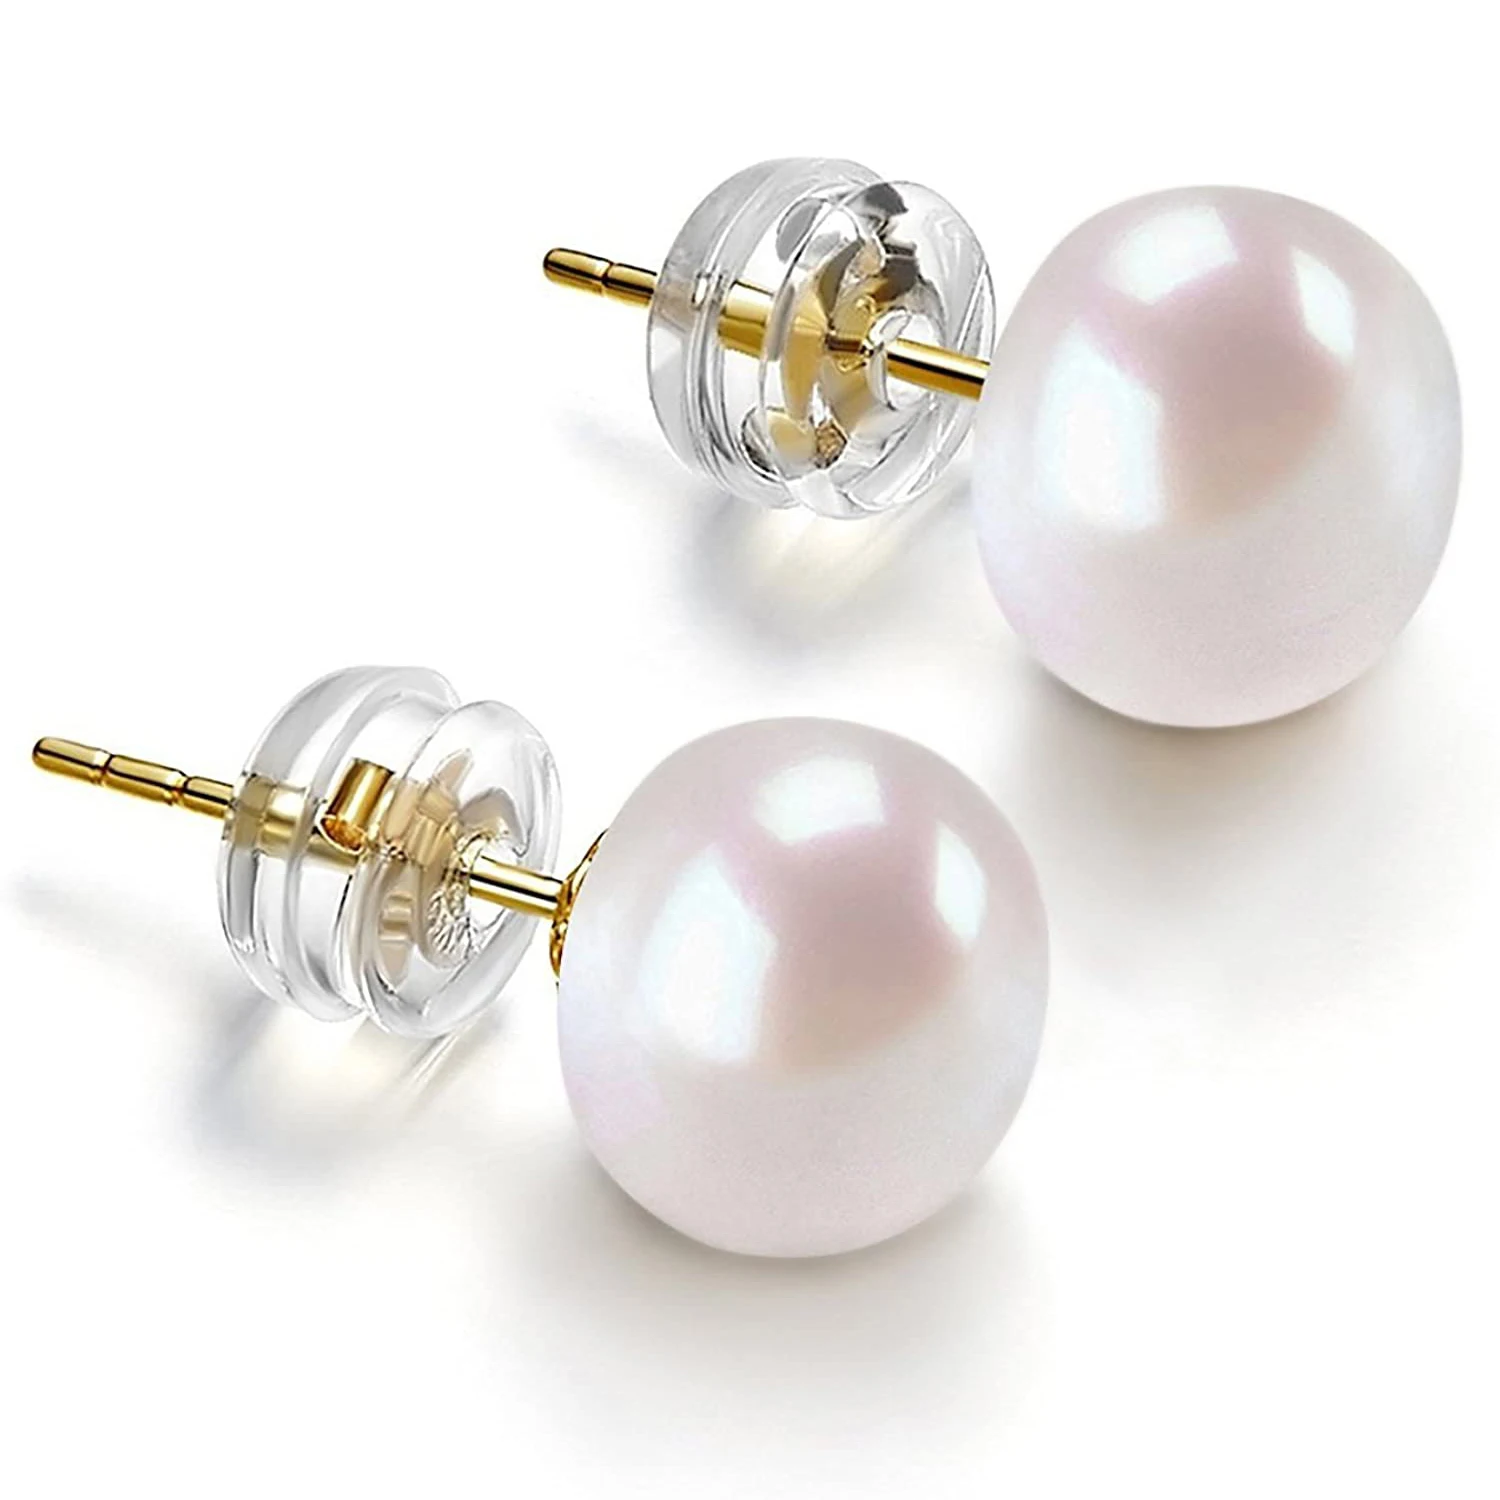 

14K Gold 925 Sterling Silver AAA+ Handpicked 6-12MM White Natural Freshwater Cultured Women Pearl Earrings Ear Studs